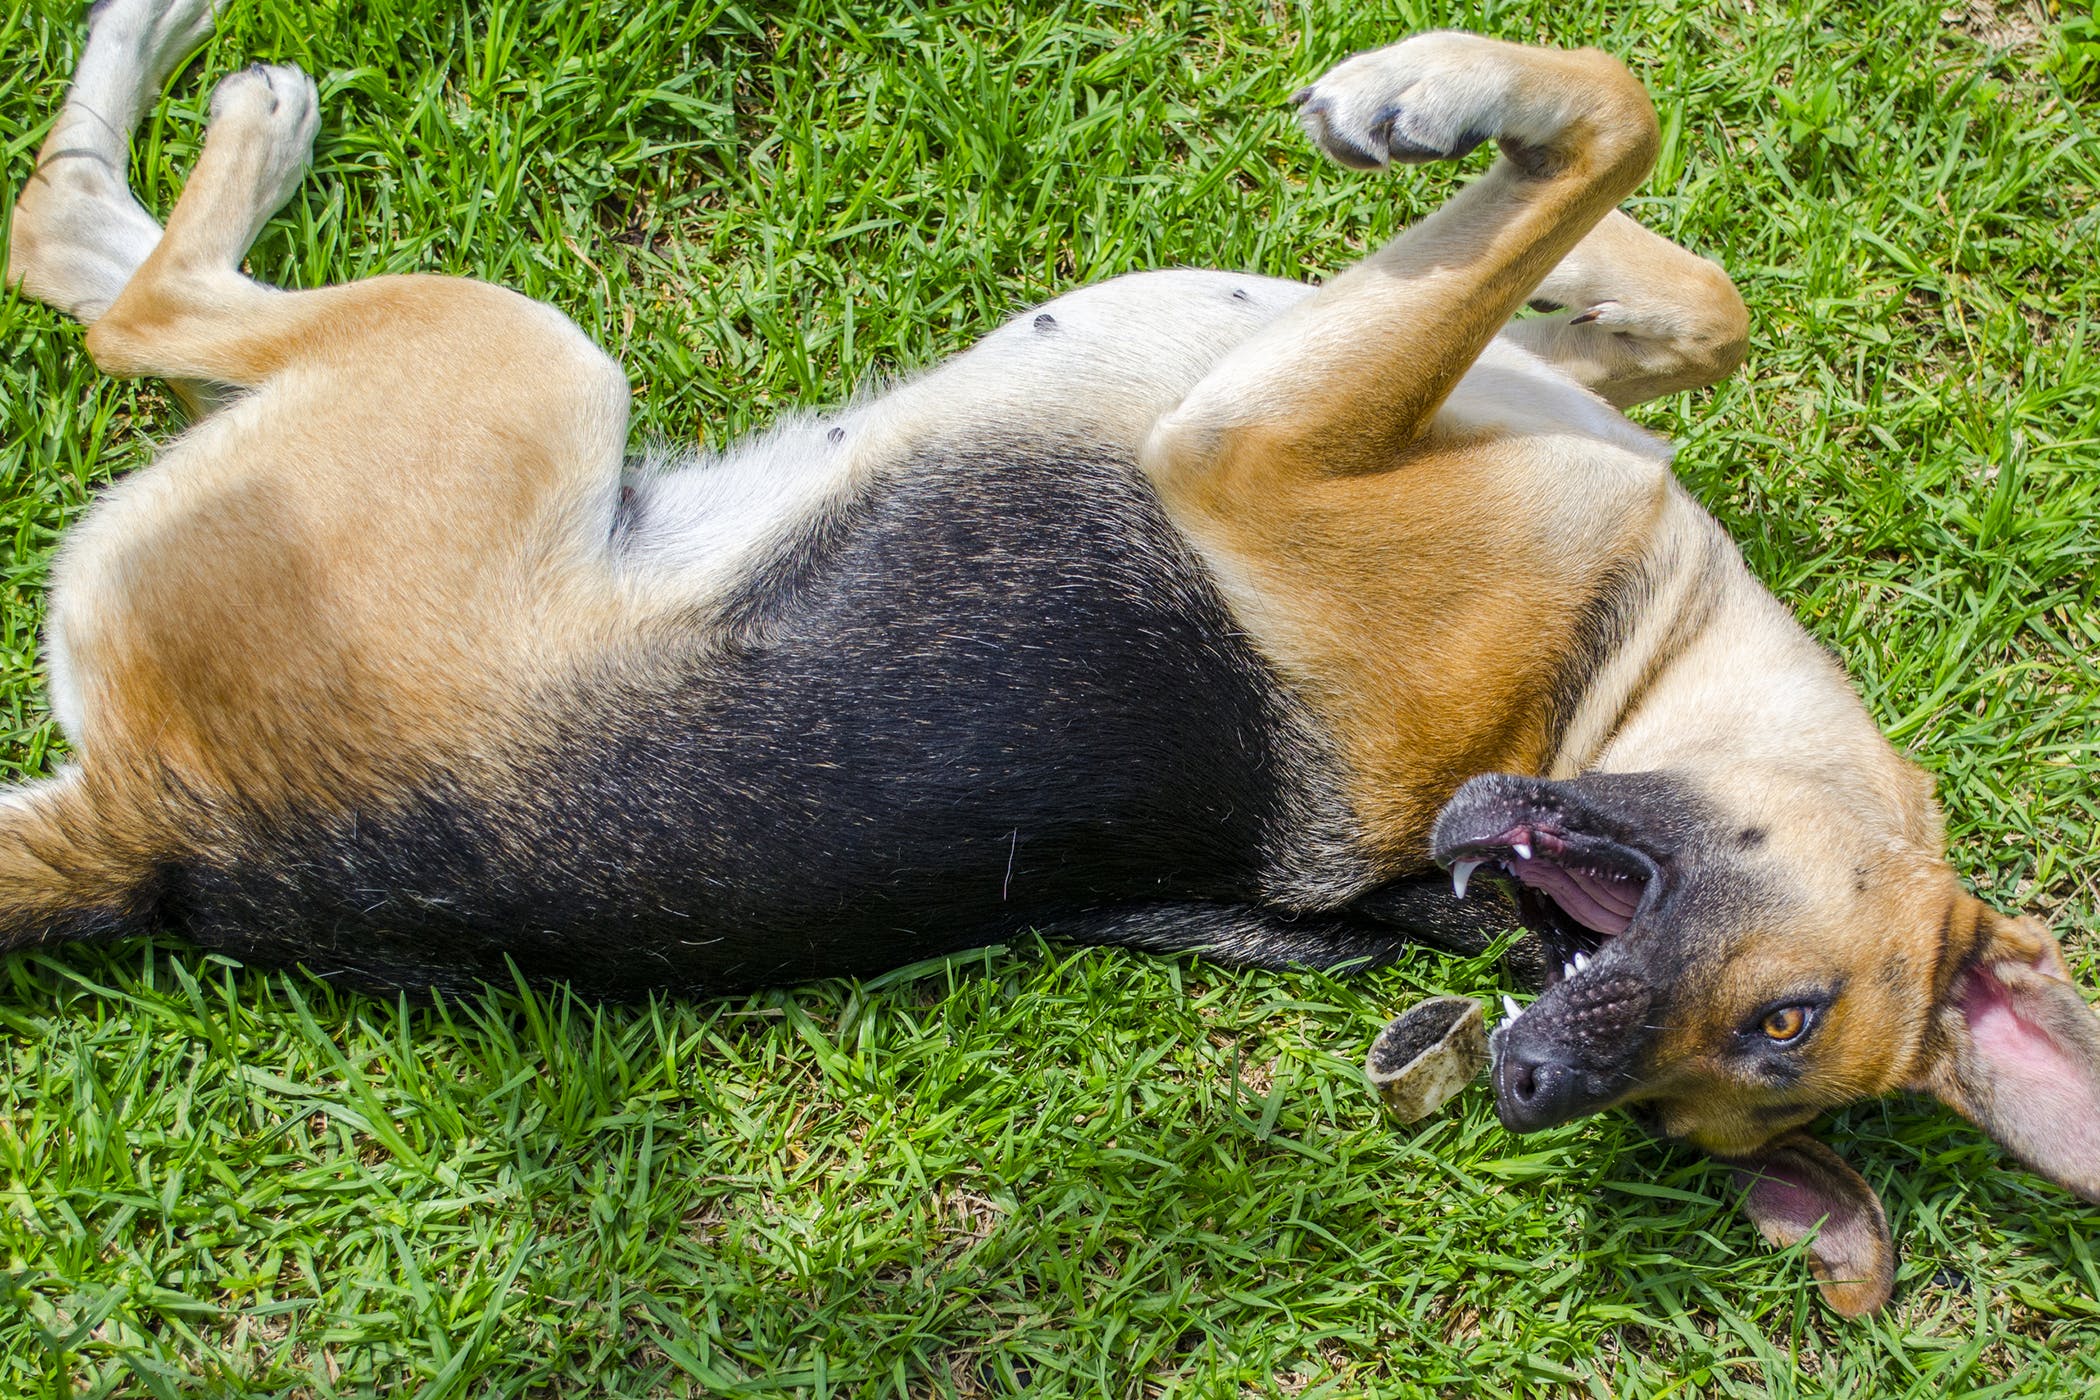 Can Shock Collars Cause Seizures in Dogs?